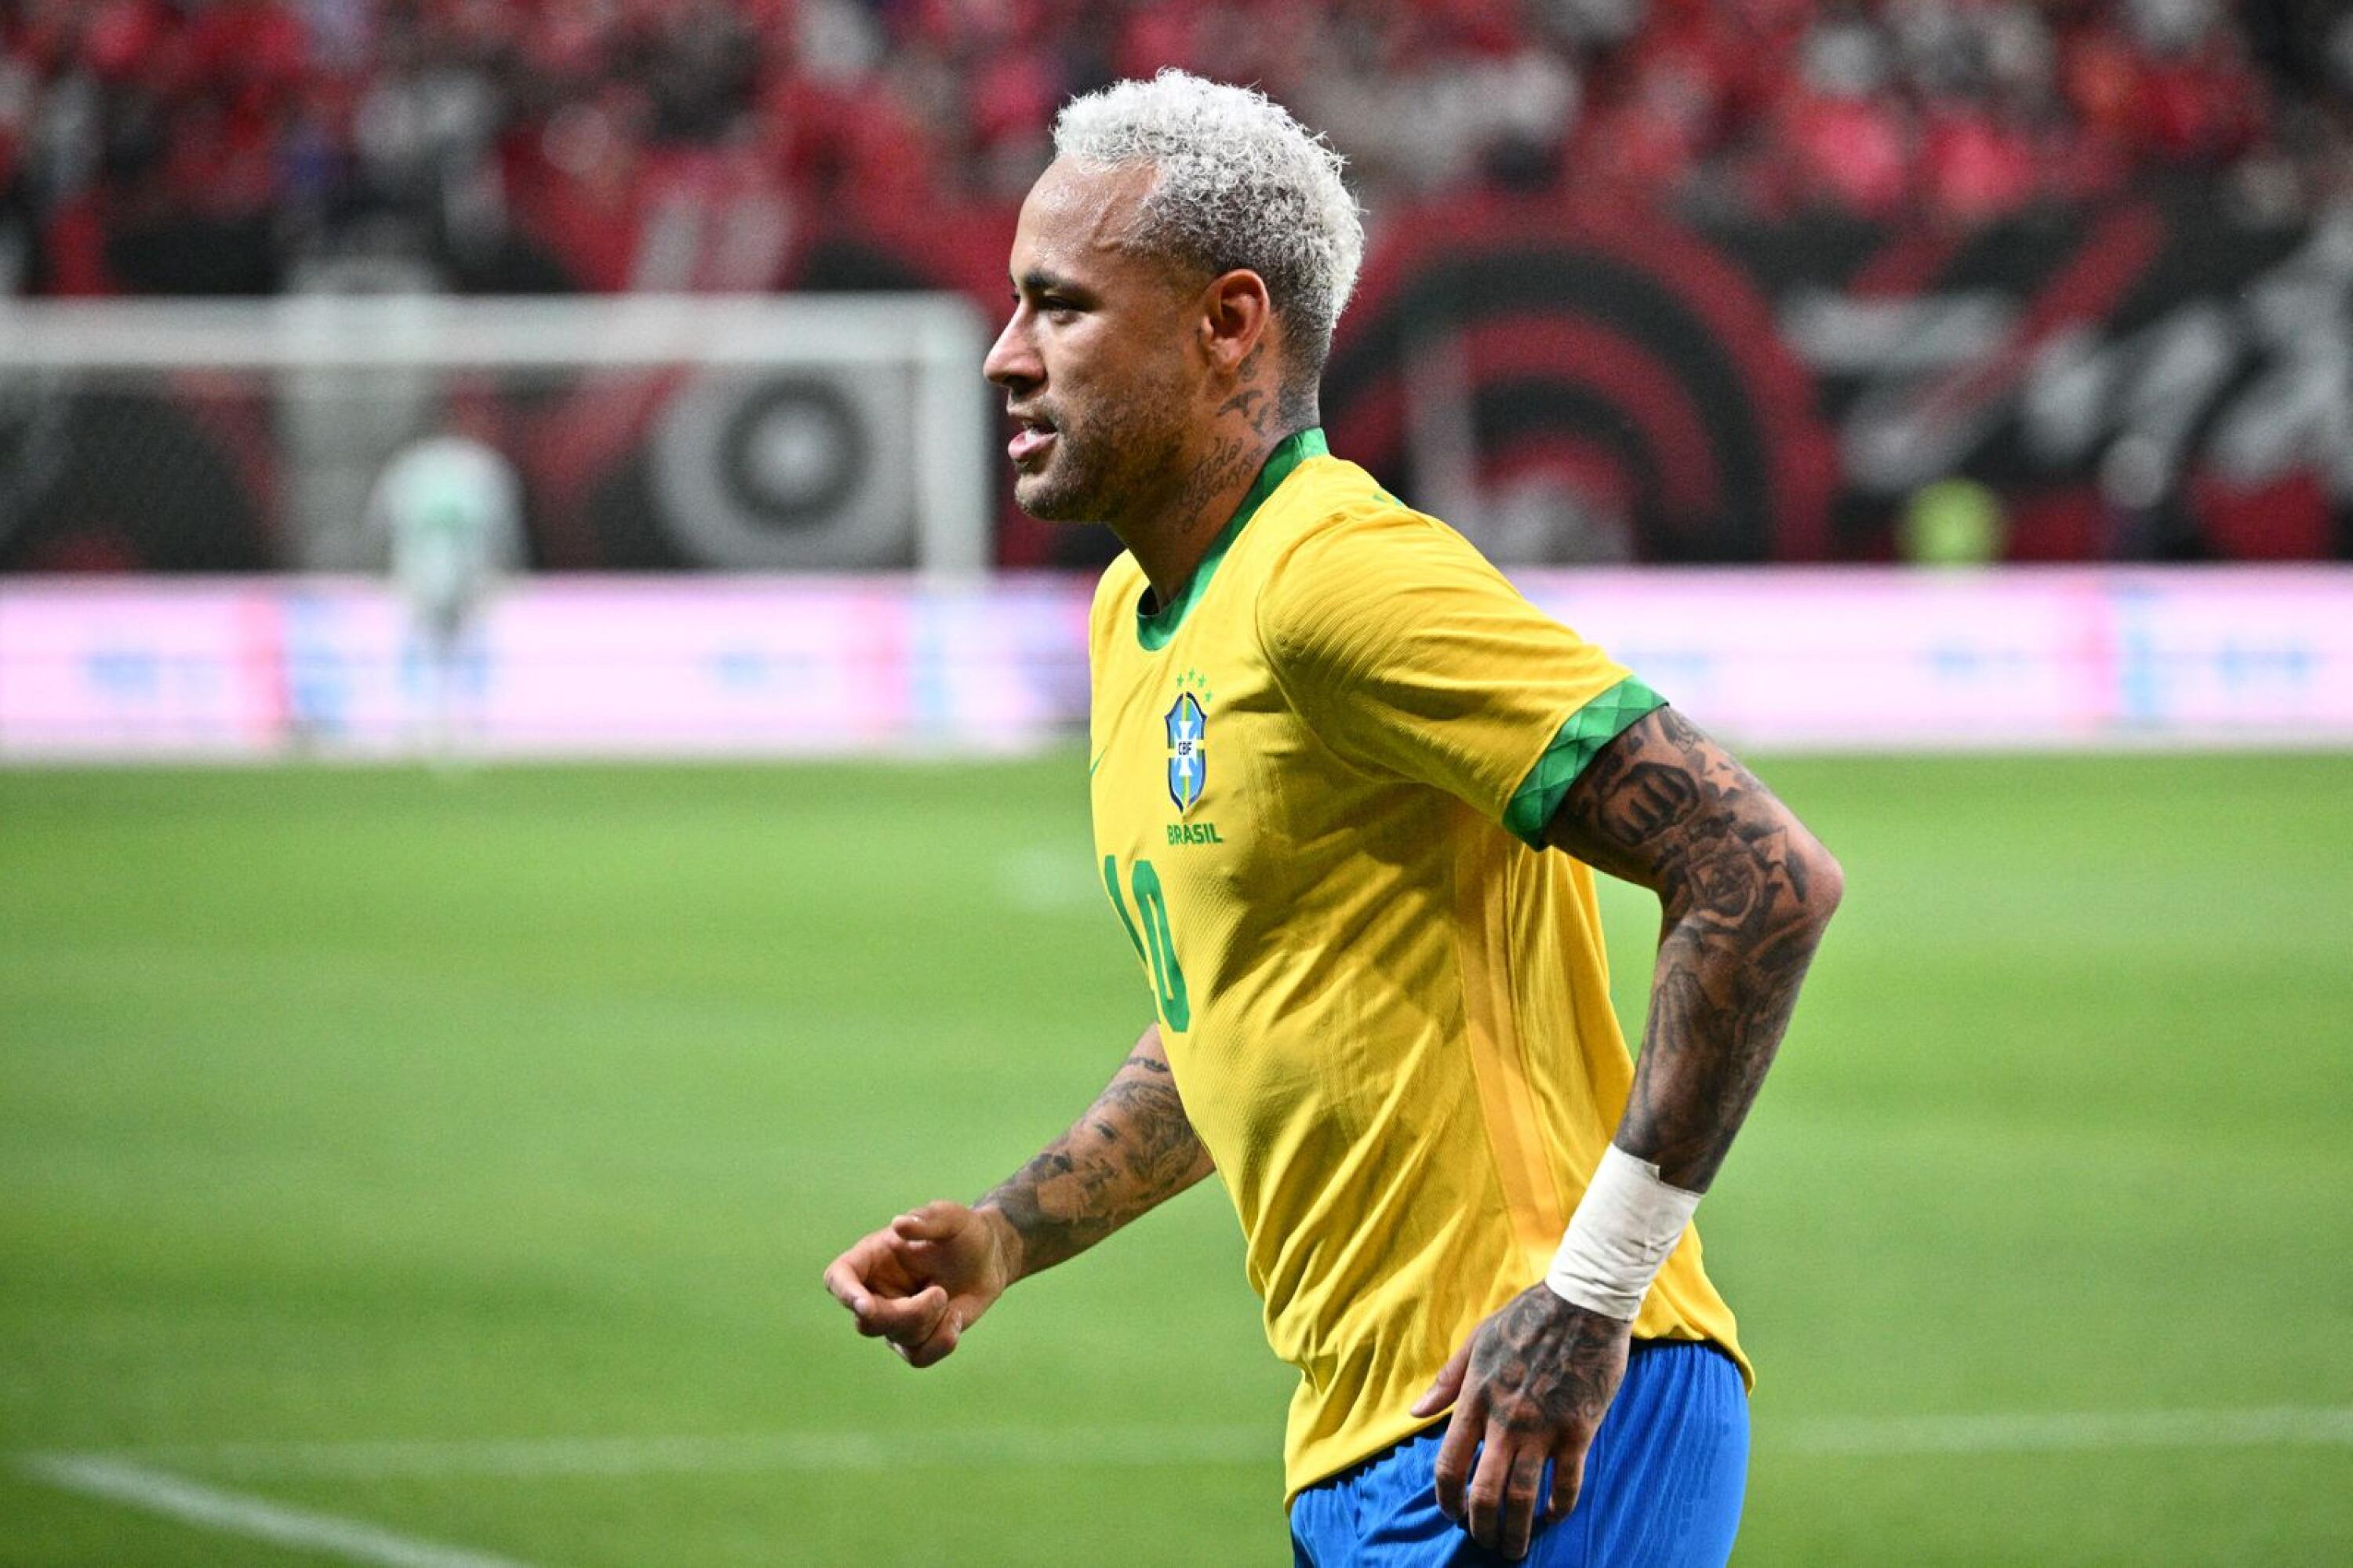 Brazil's forward Neymar celebrates after he scored a penalty goal during their international football friendly match against South Korea at Seoul World Cup Stadium in Seoul on Thursday